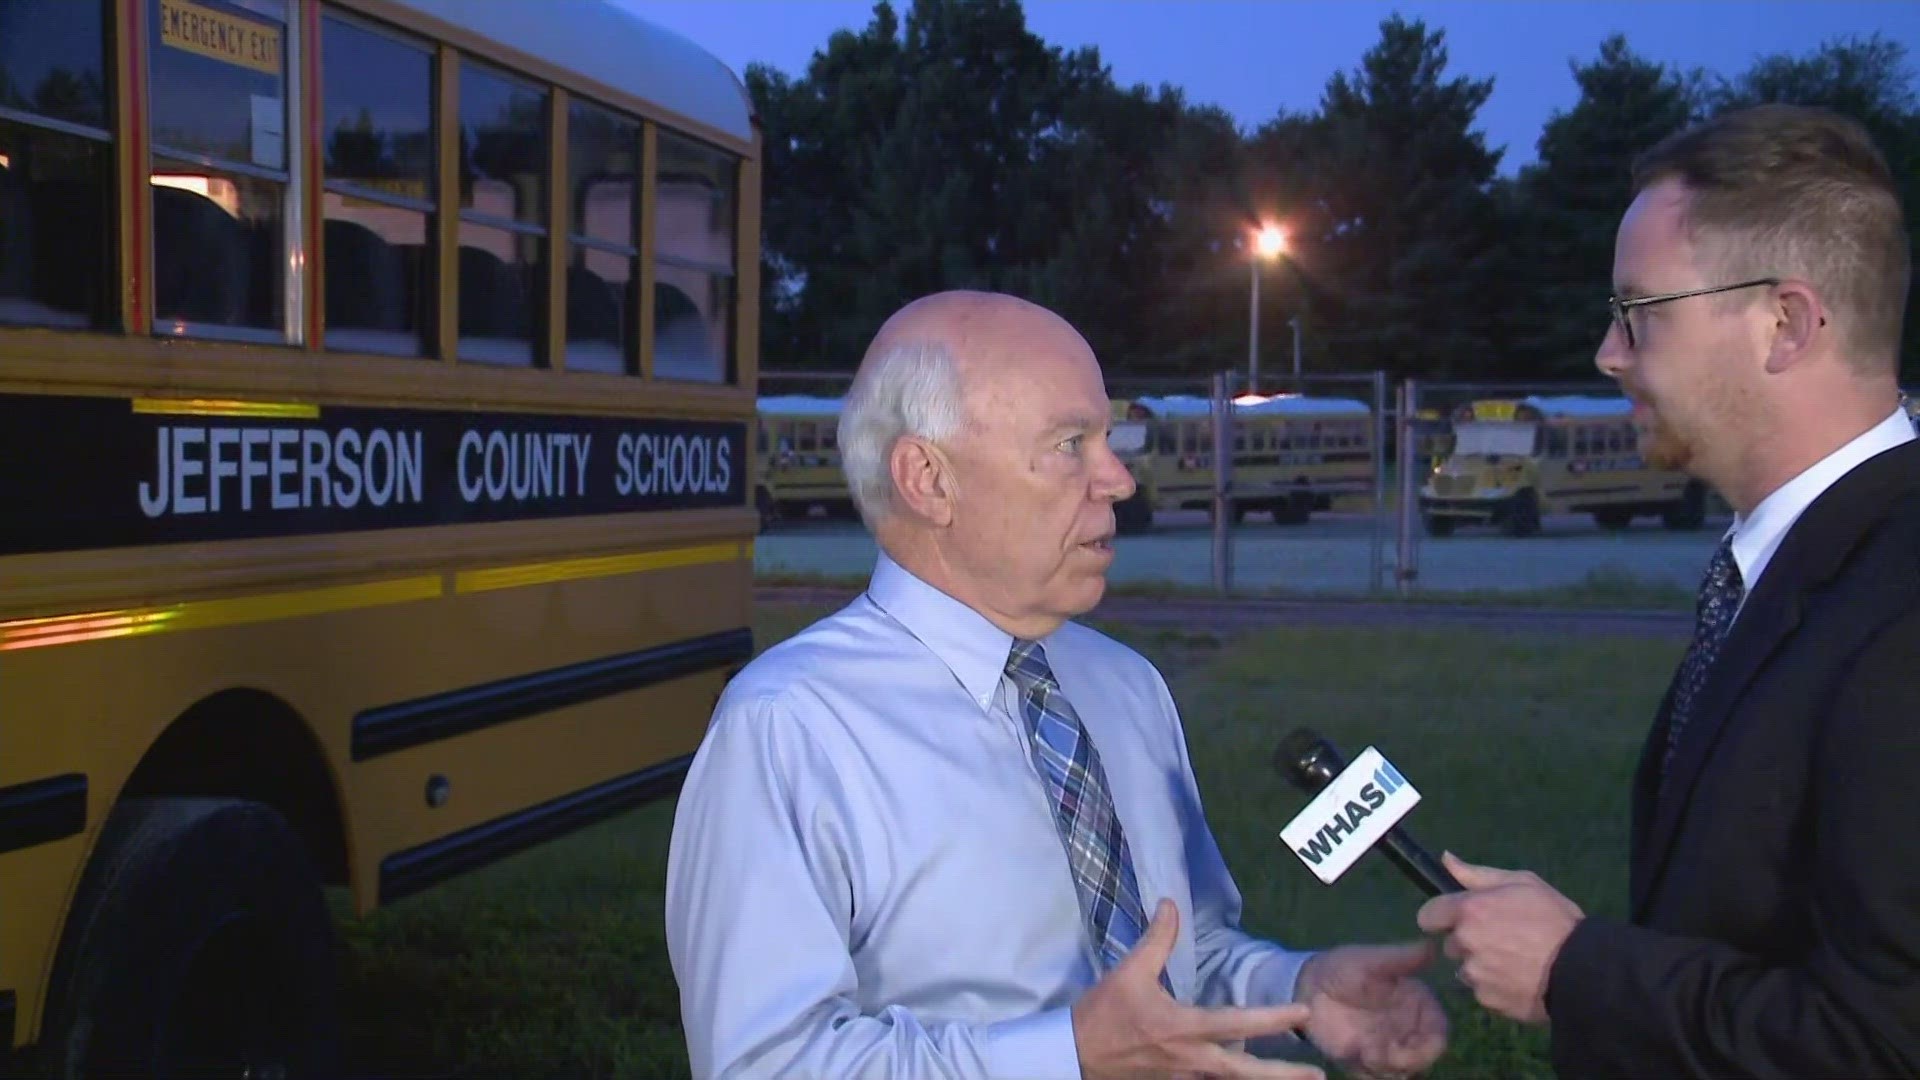 JCPS official says bus drivers are prioritizing student safety over